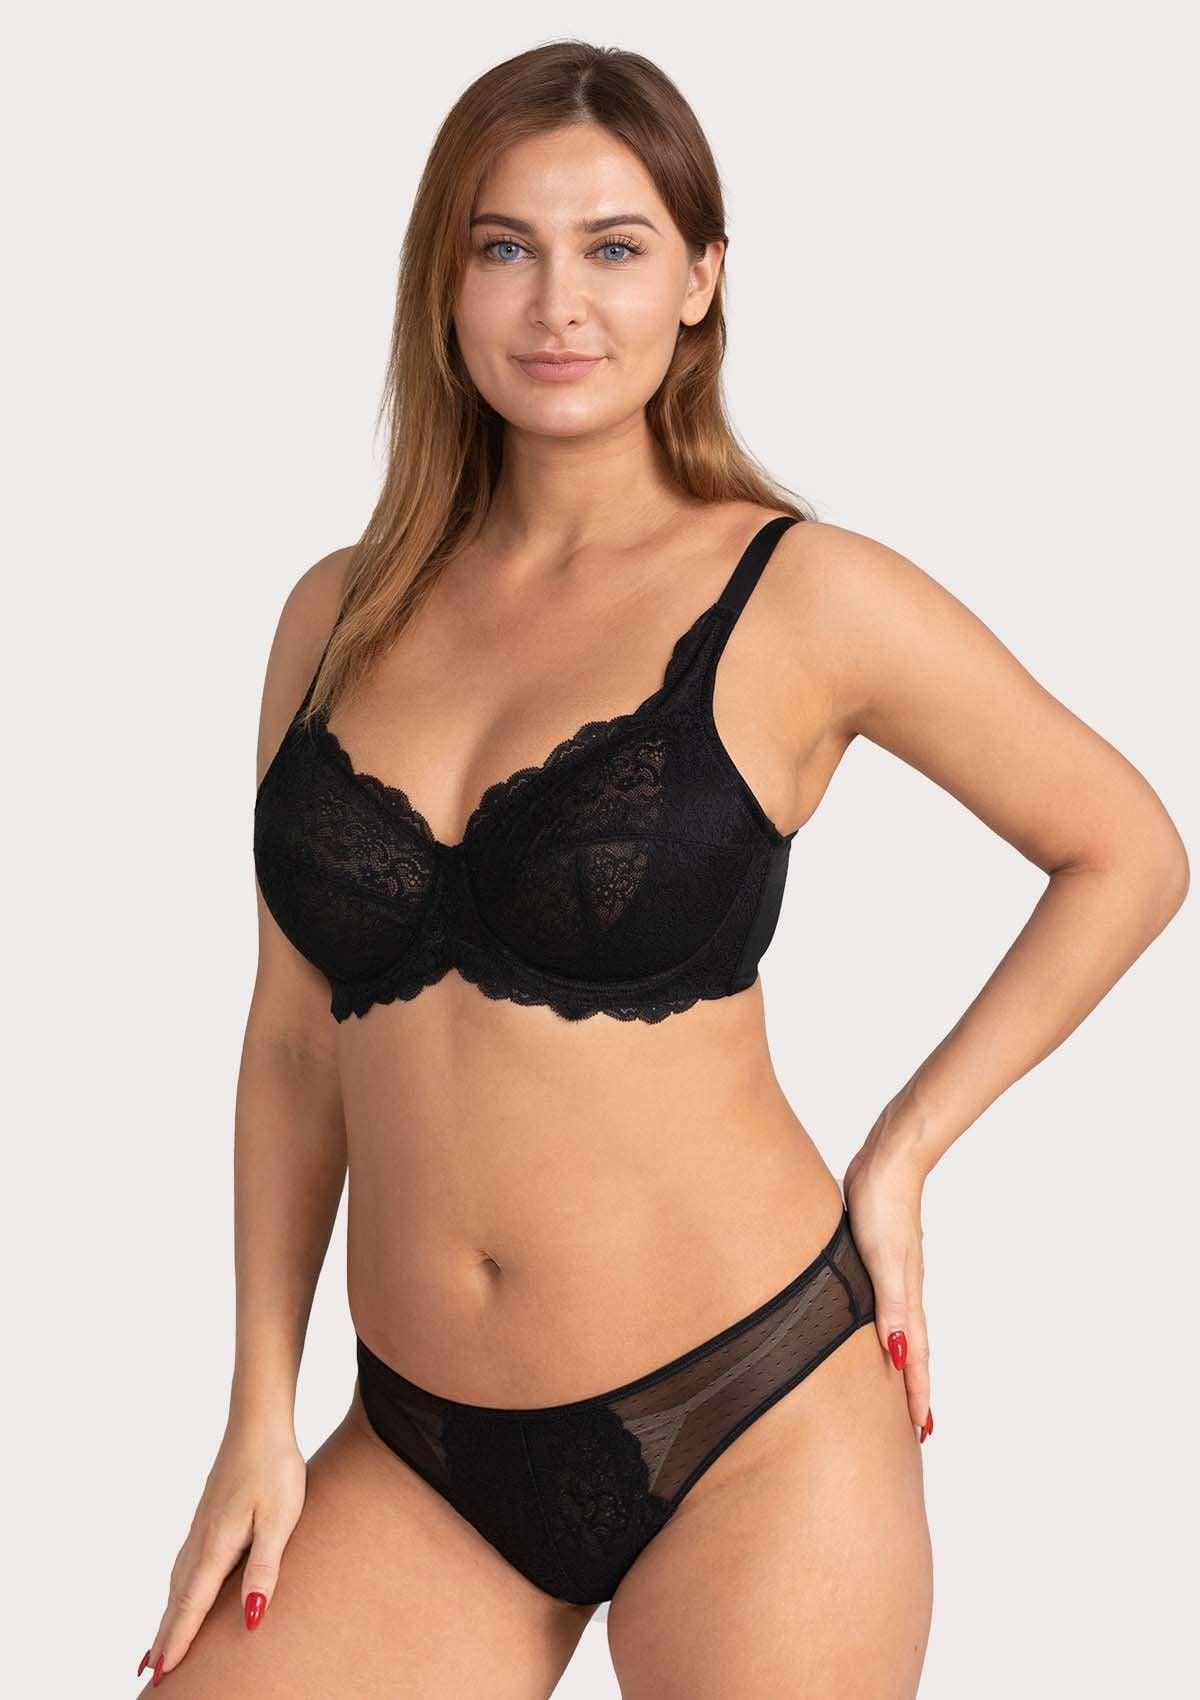 HSIA All-Over Floral Lace Unlined Bra: Minimizer Bra For Heavy Breasts - Black / 34 / D